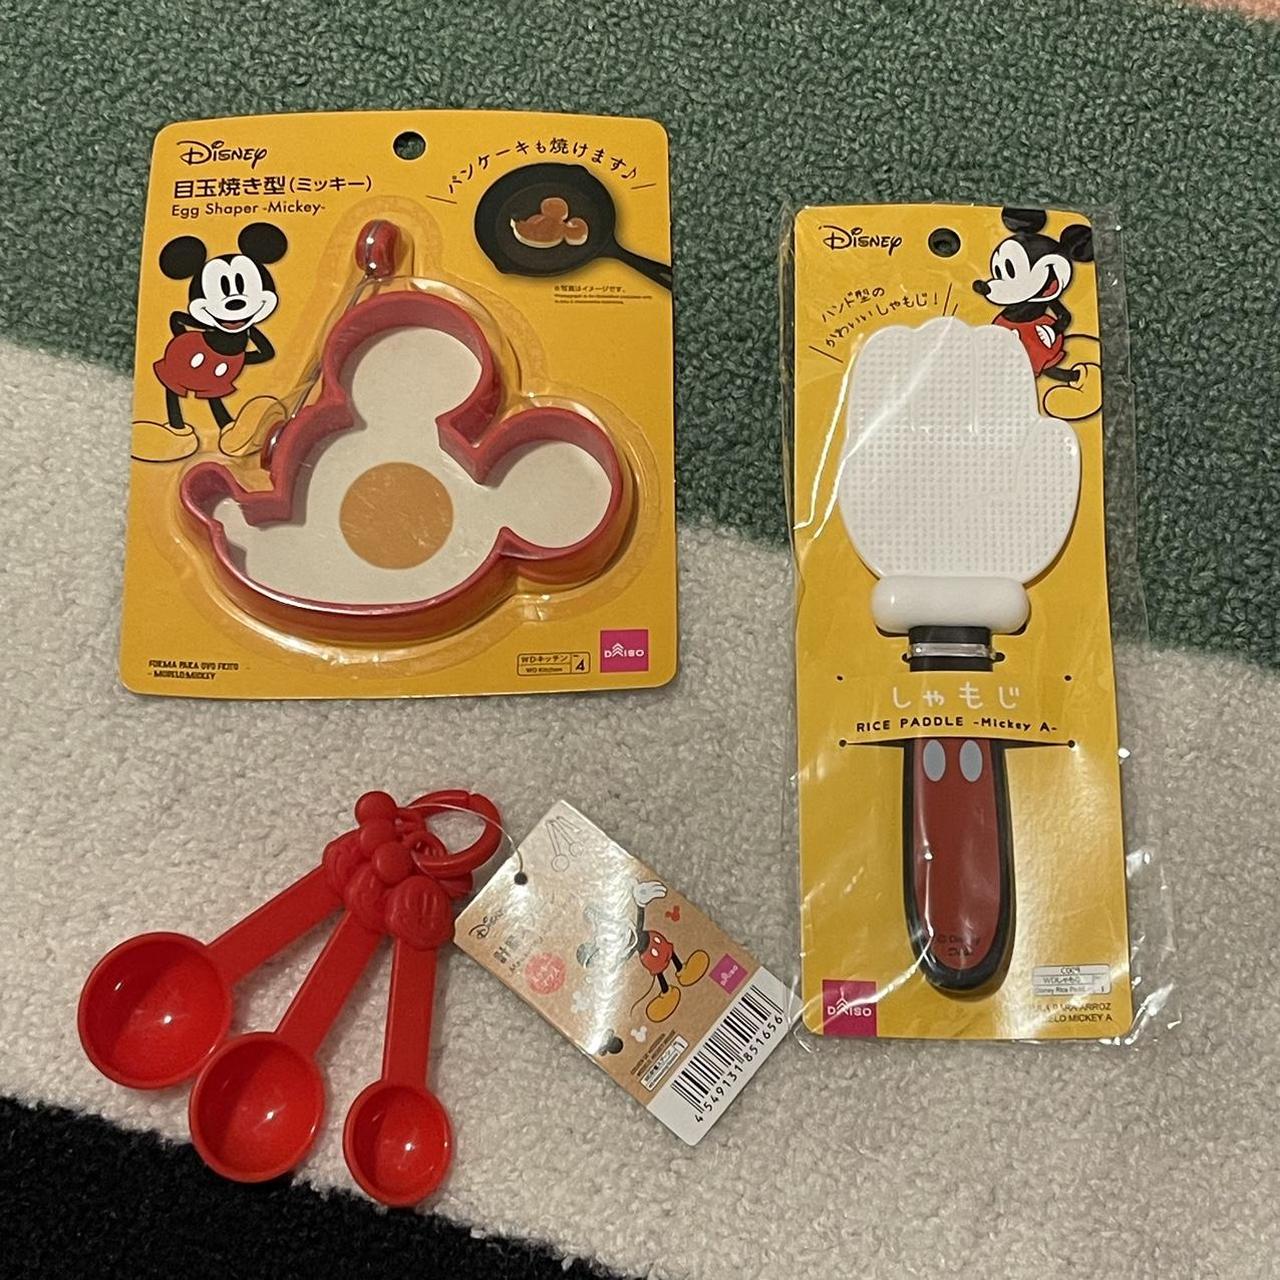 Mickey Mouse Kitchen Utensils & Gadgets